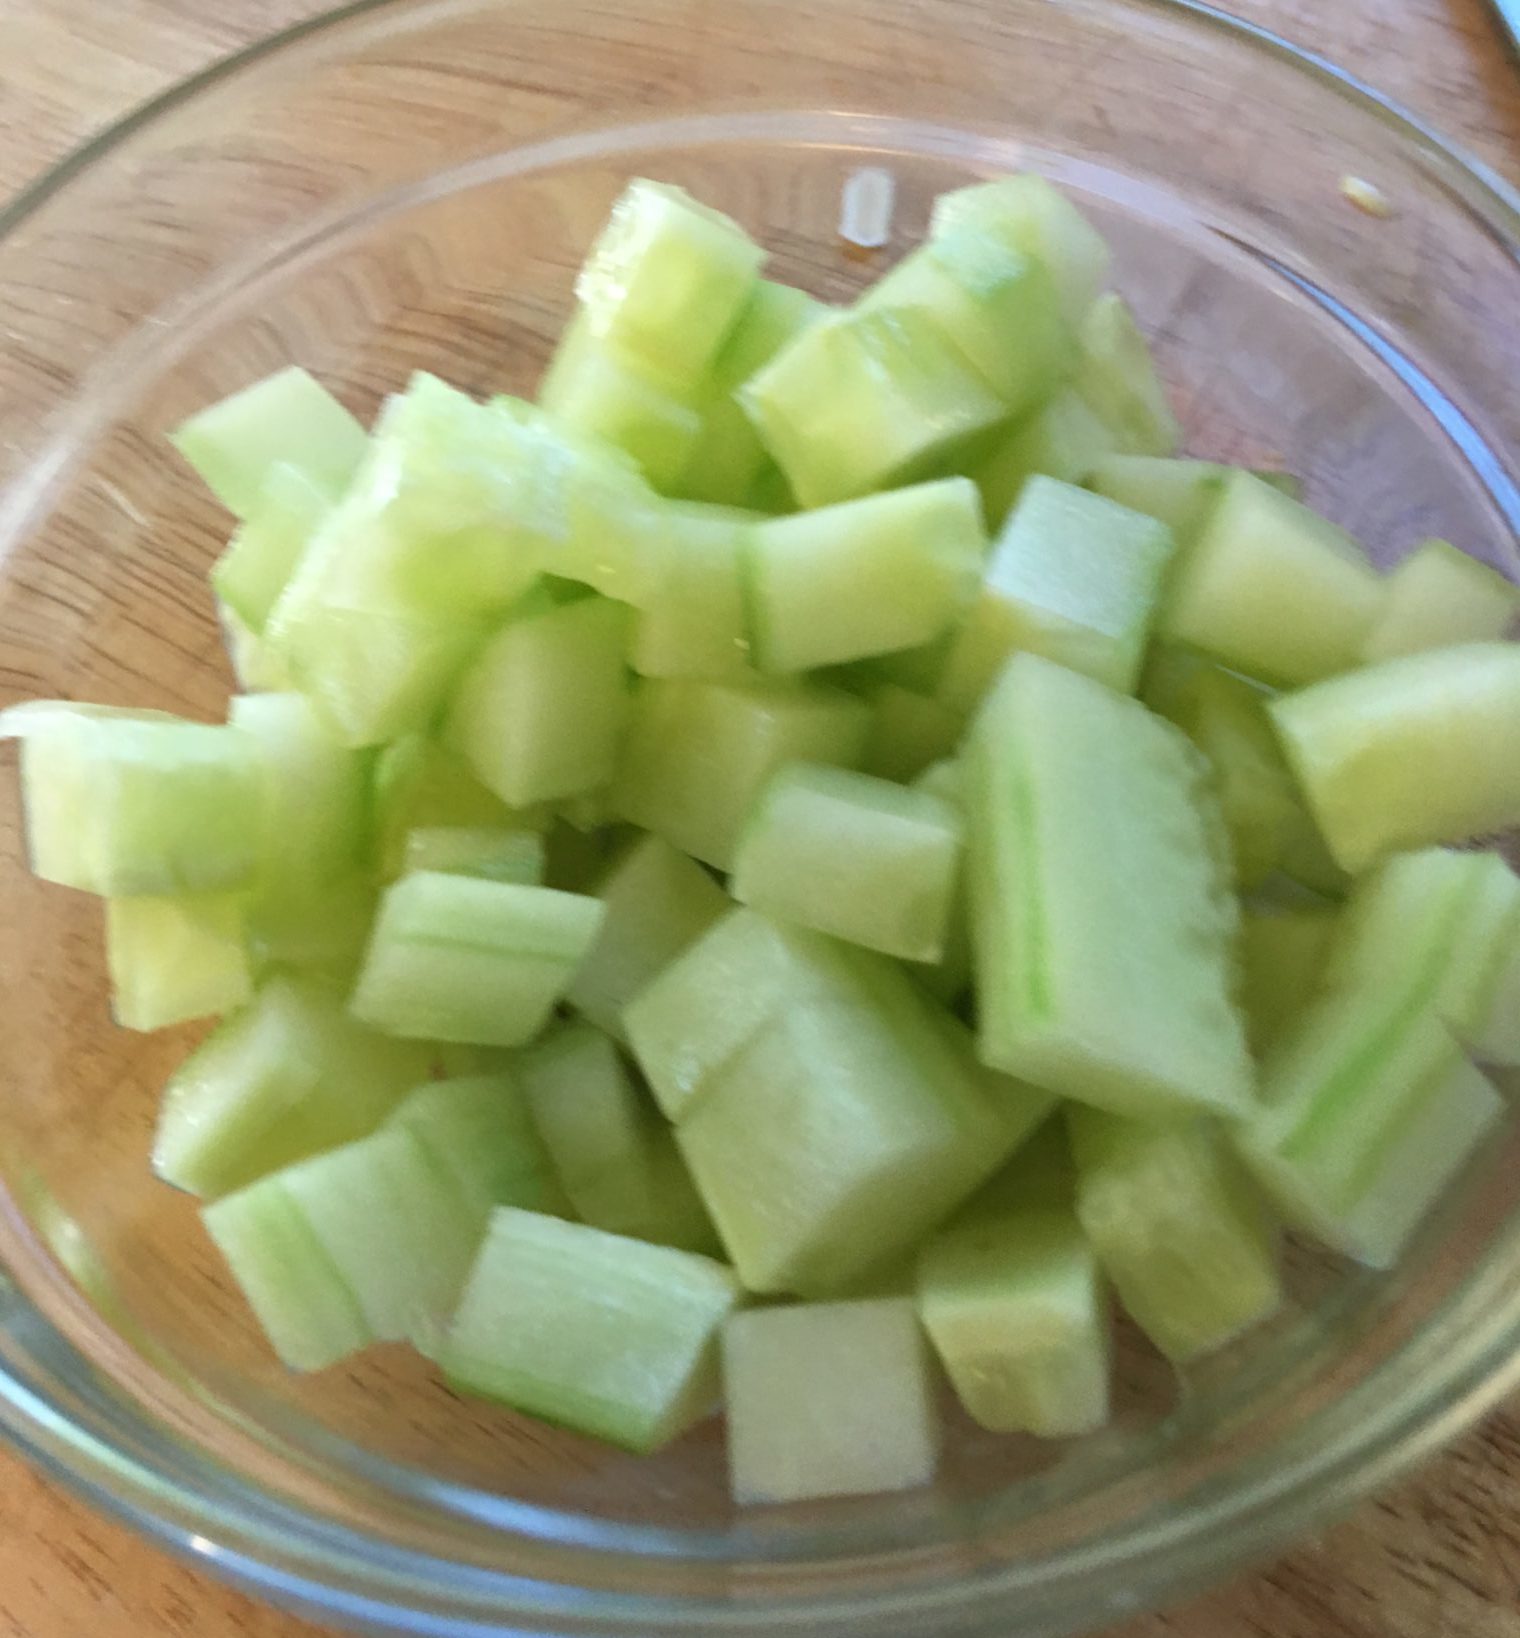 Cucumber dices in a bowl